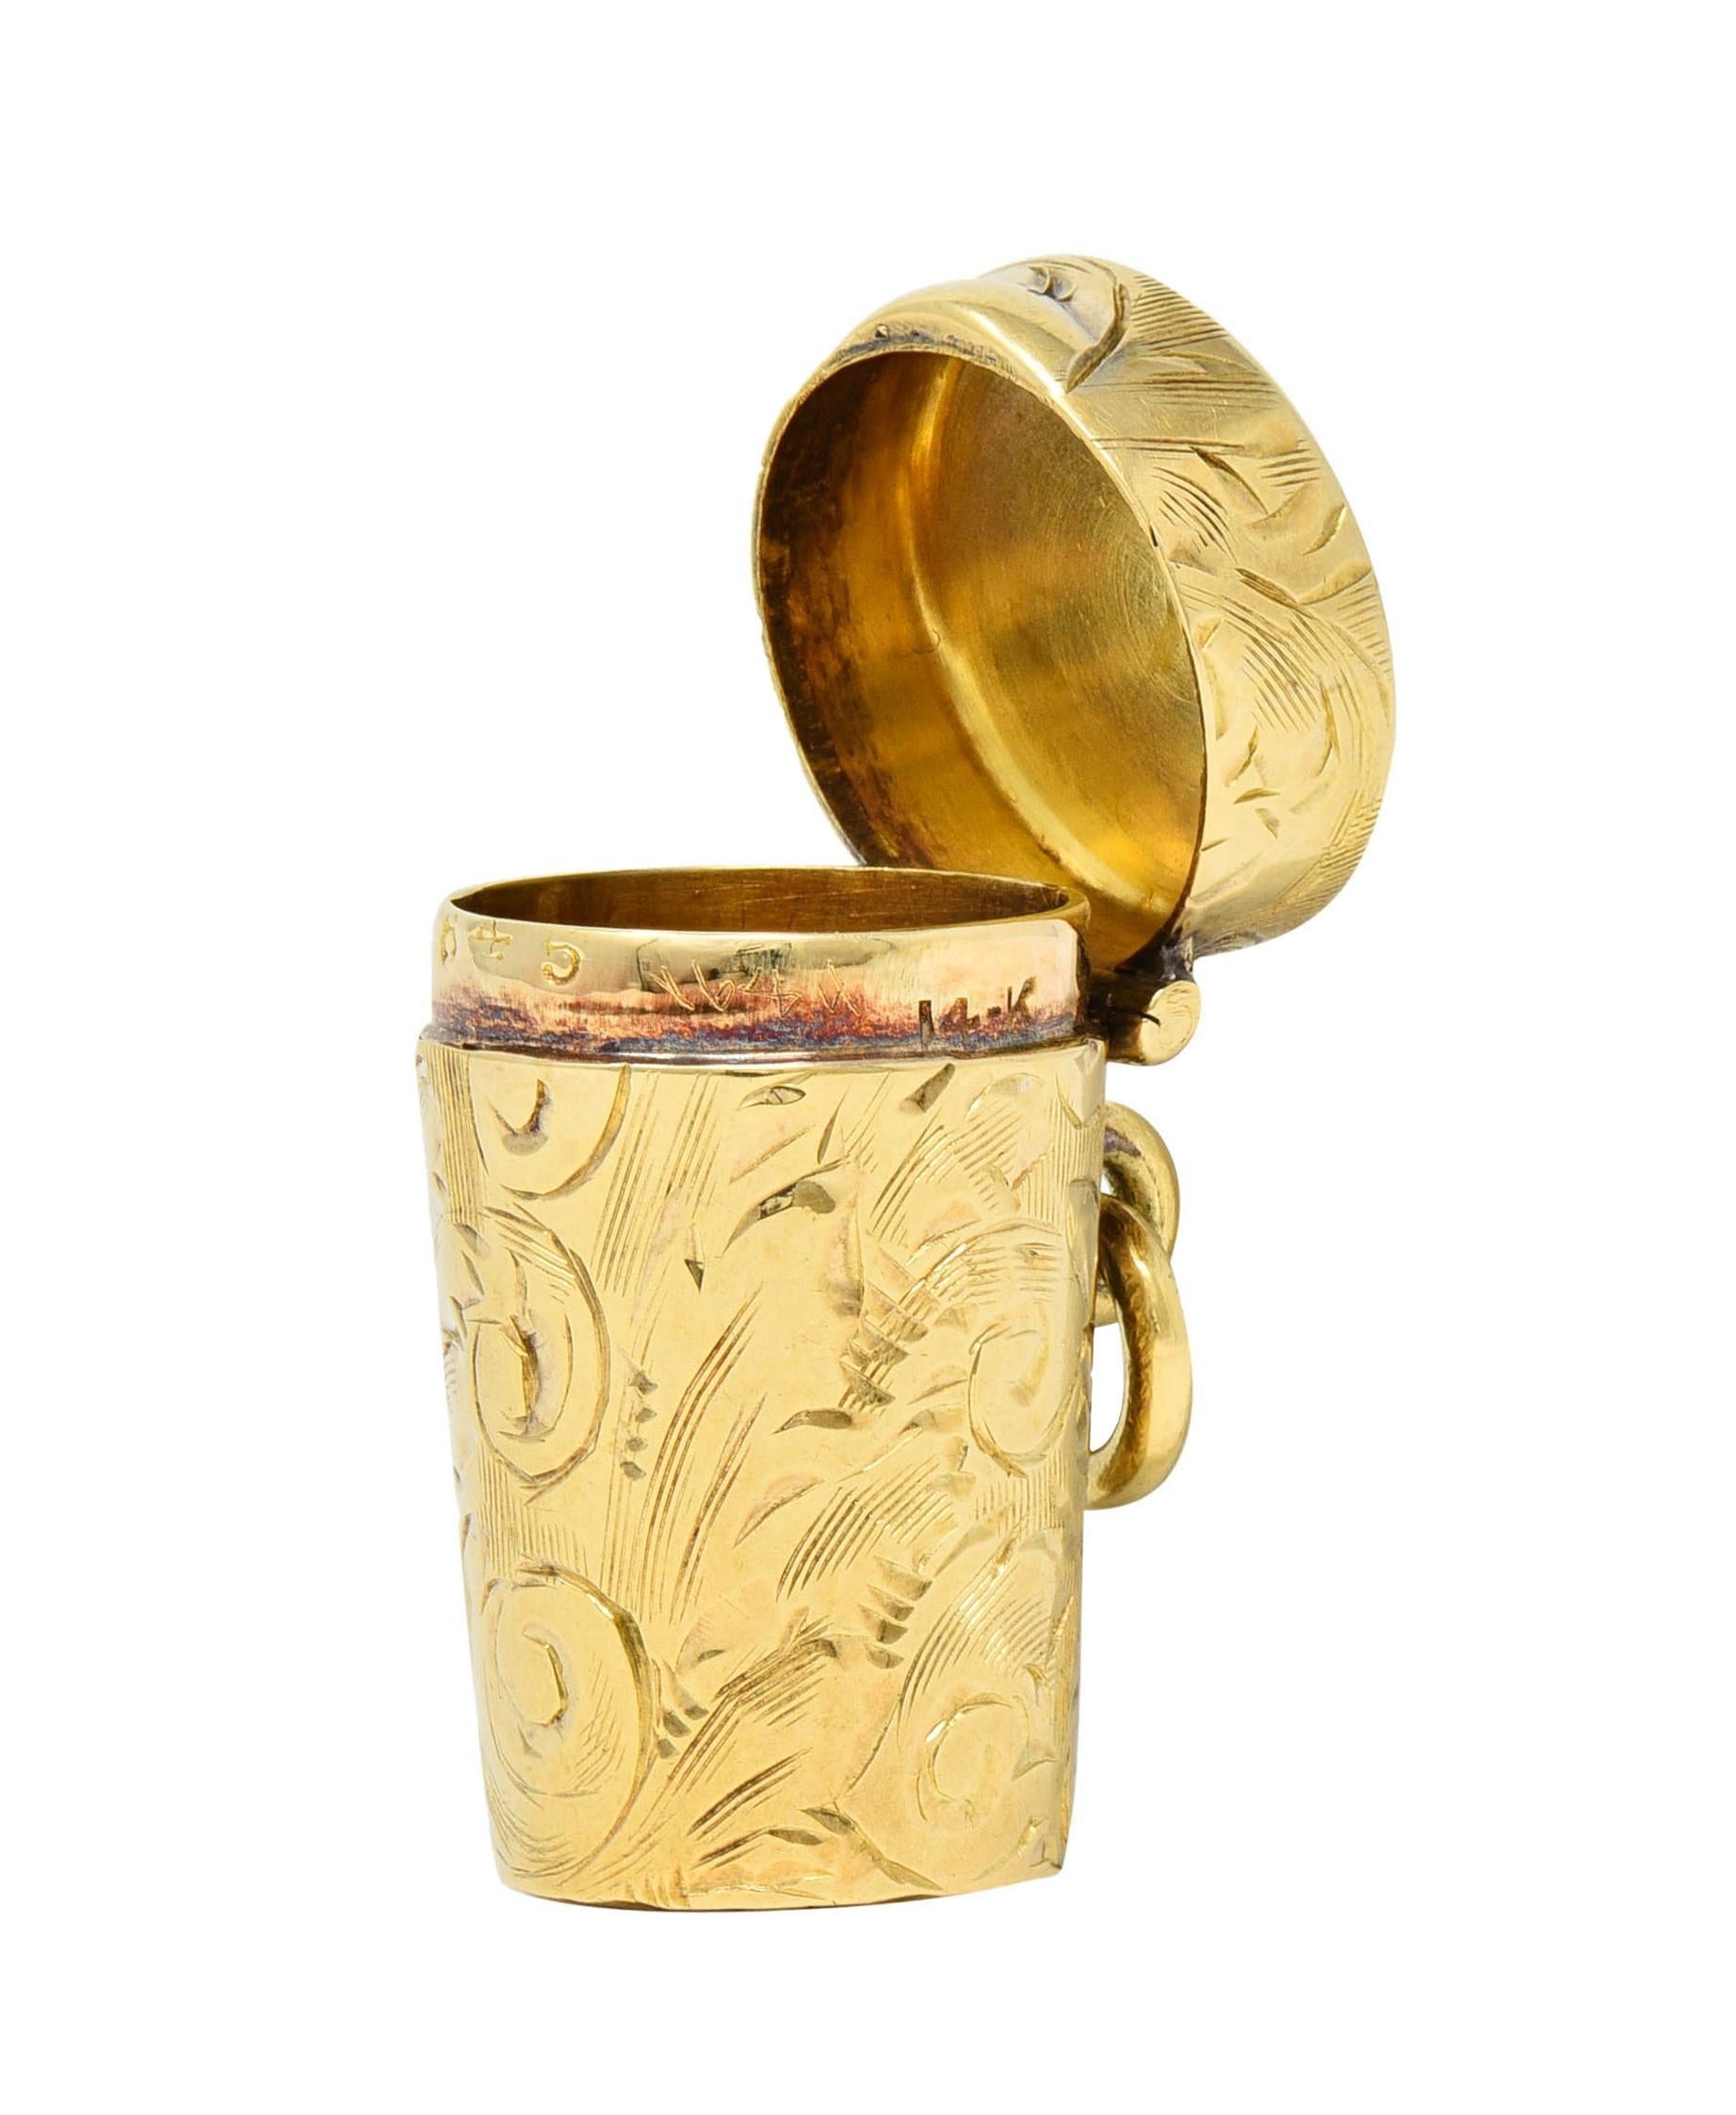 Designed as a cylindrical container - tapered with hinged cap 
Engraved throughout with scrolling sunflower motifs
With high polish finish and opens via grooved lip
Suspending from jump ring bale
Stamped for 14 karat gold
Fully signed or Tiffany &